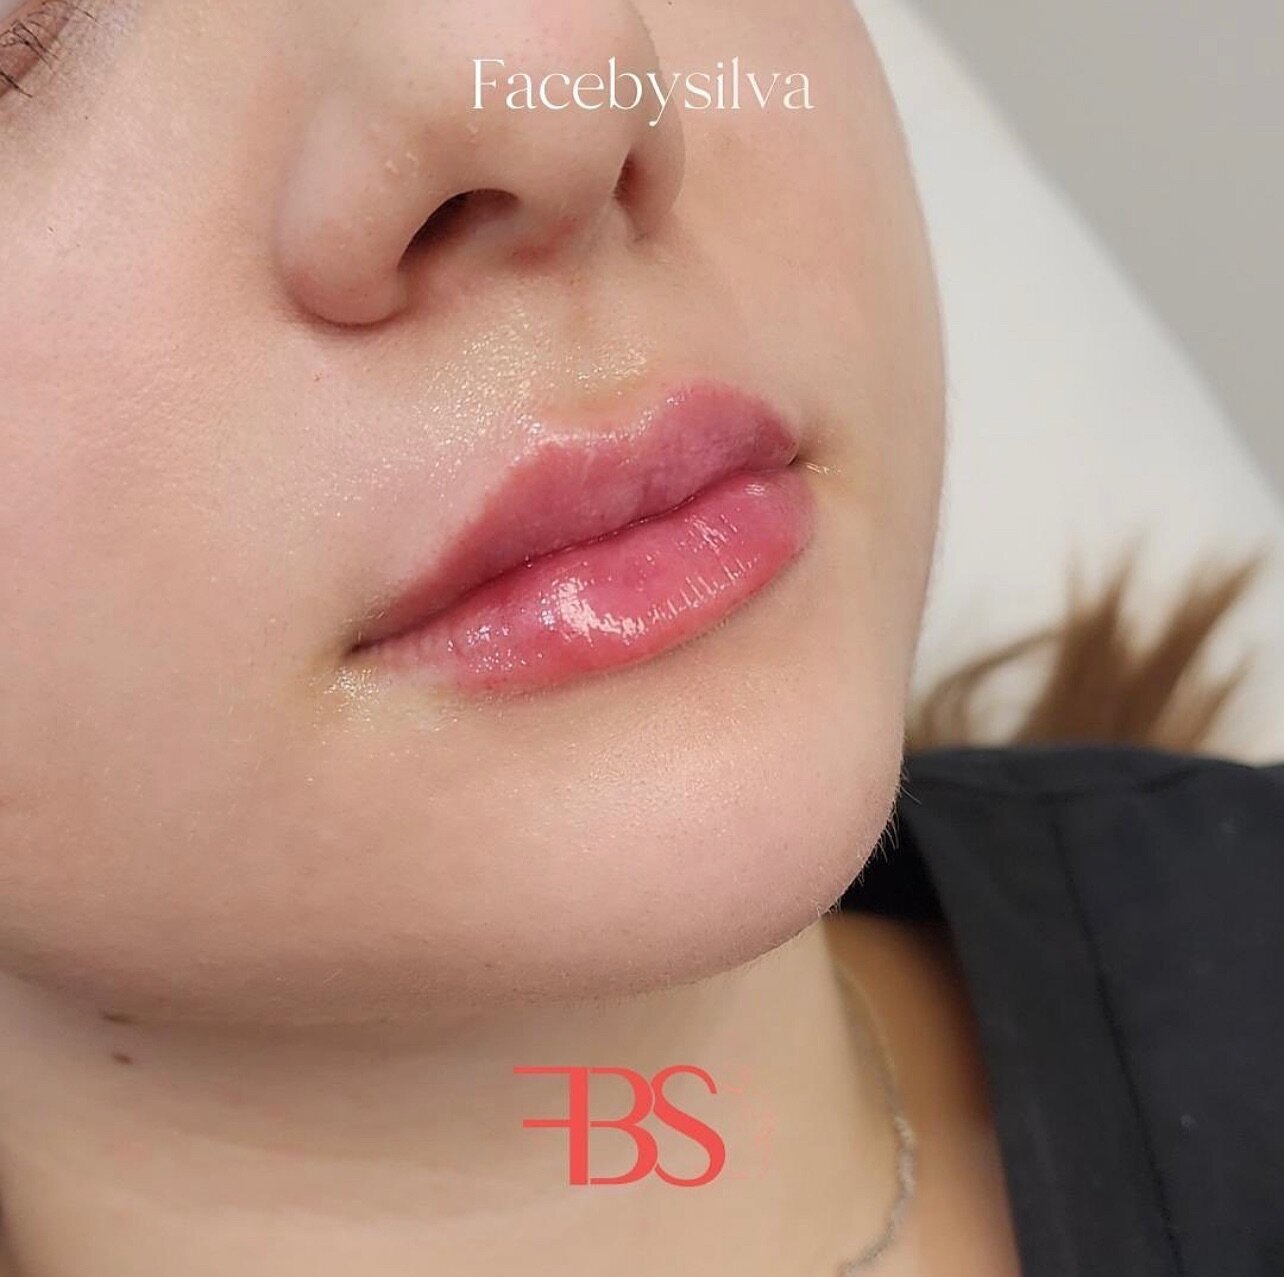 Pretty and Pink, heavenly lips
Book your consultation today, for lips to love!

Bexley - Mondays - 0450 890 890 
📍 Bondi 8014 8949  Tues &amp; Sat
📍 Narellan 8294 3247 Wed
📍 Macarthur 8294 3207 Thurs &amp; Fri
&bull; DM @facebysilva for more infor